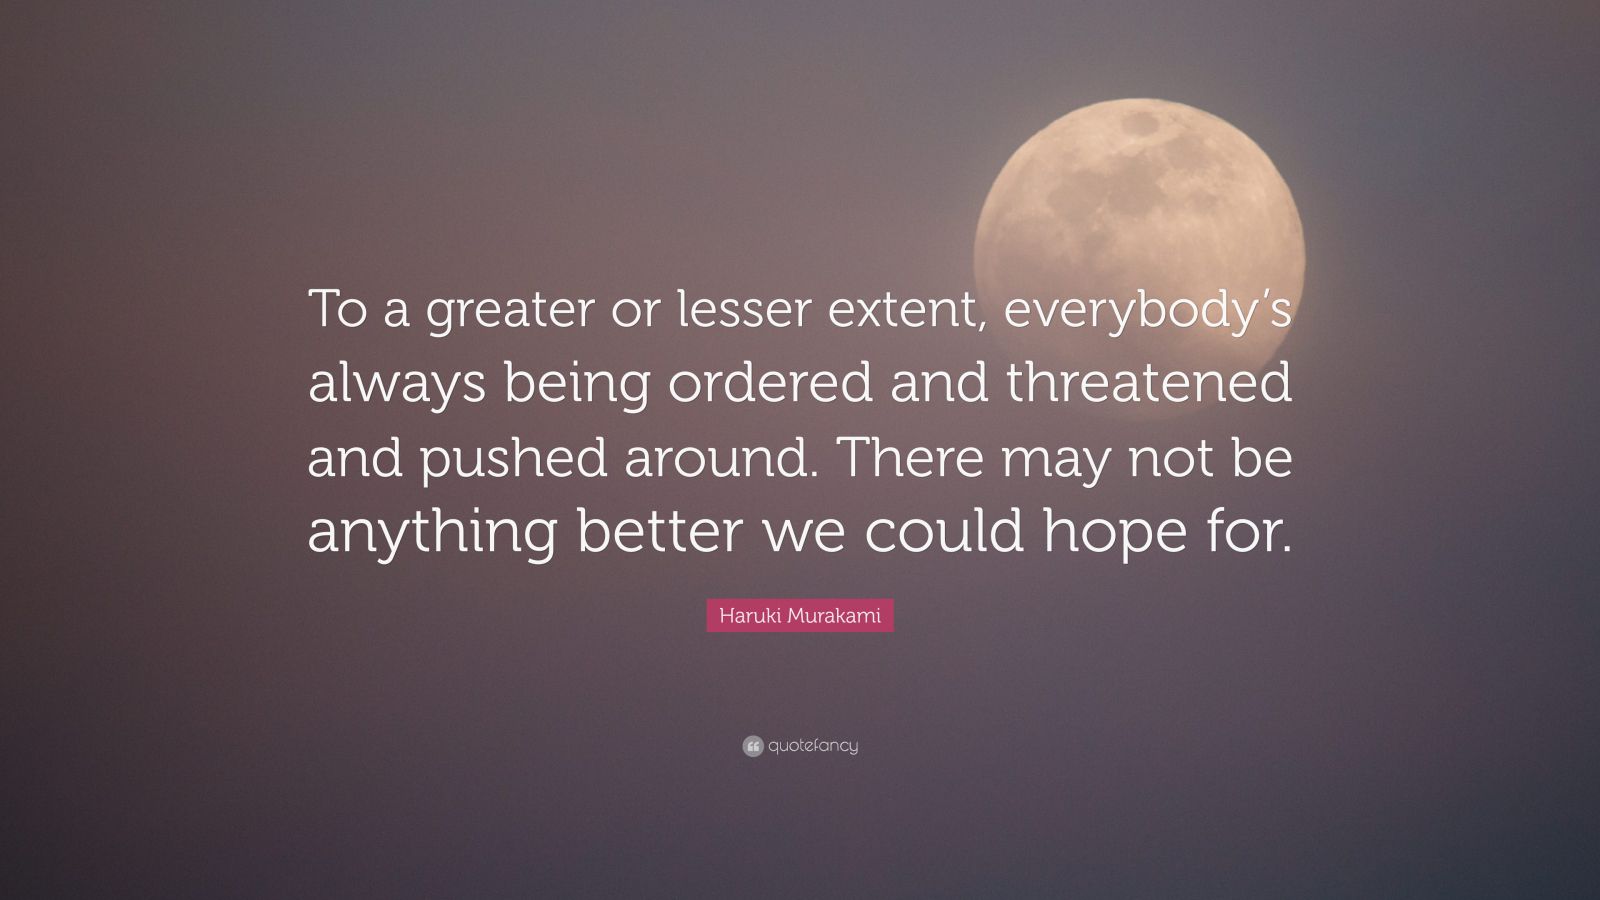 Haruki Murakami Quote: “To a greater or lesser extent, everybody’s ...